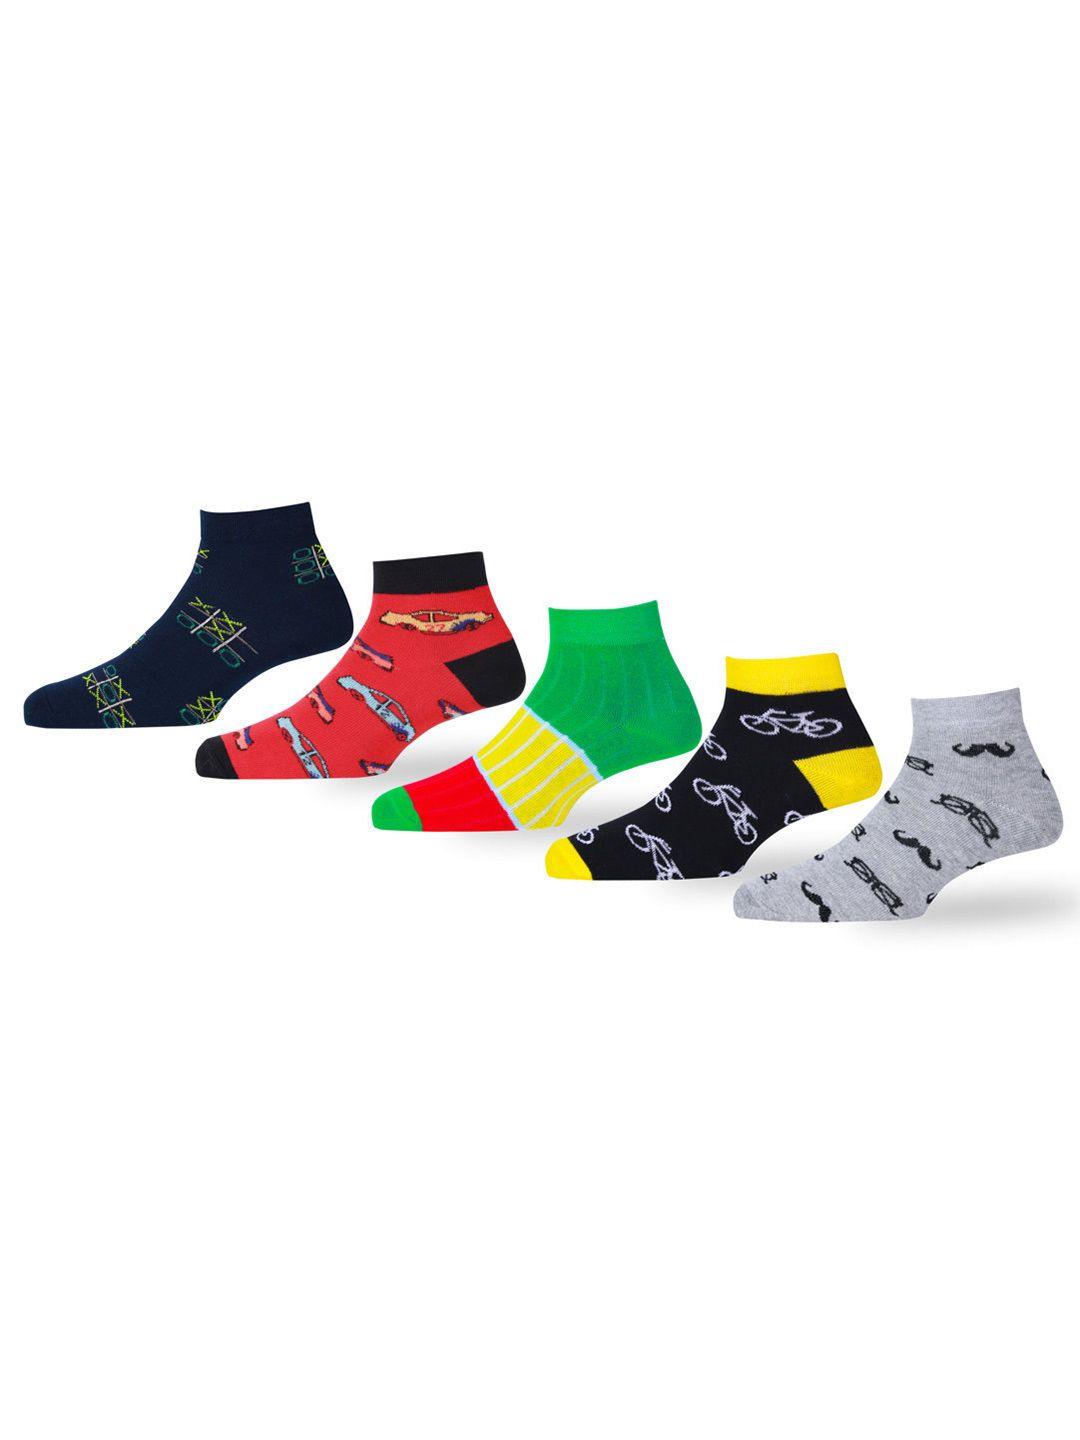 RC. ROYAL CLASS Kids Pack Of 5 Patterned Cotton Ankle-Length Socks